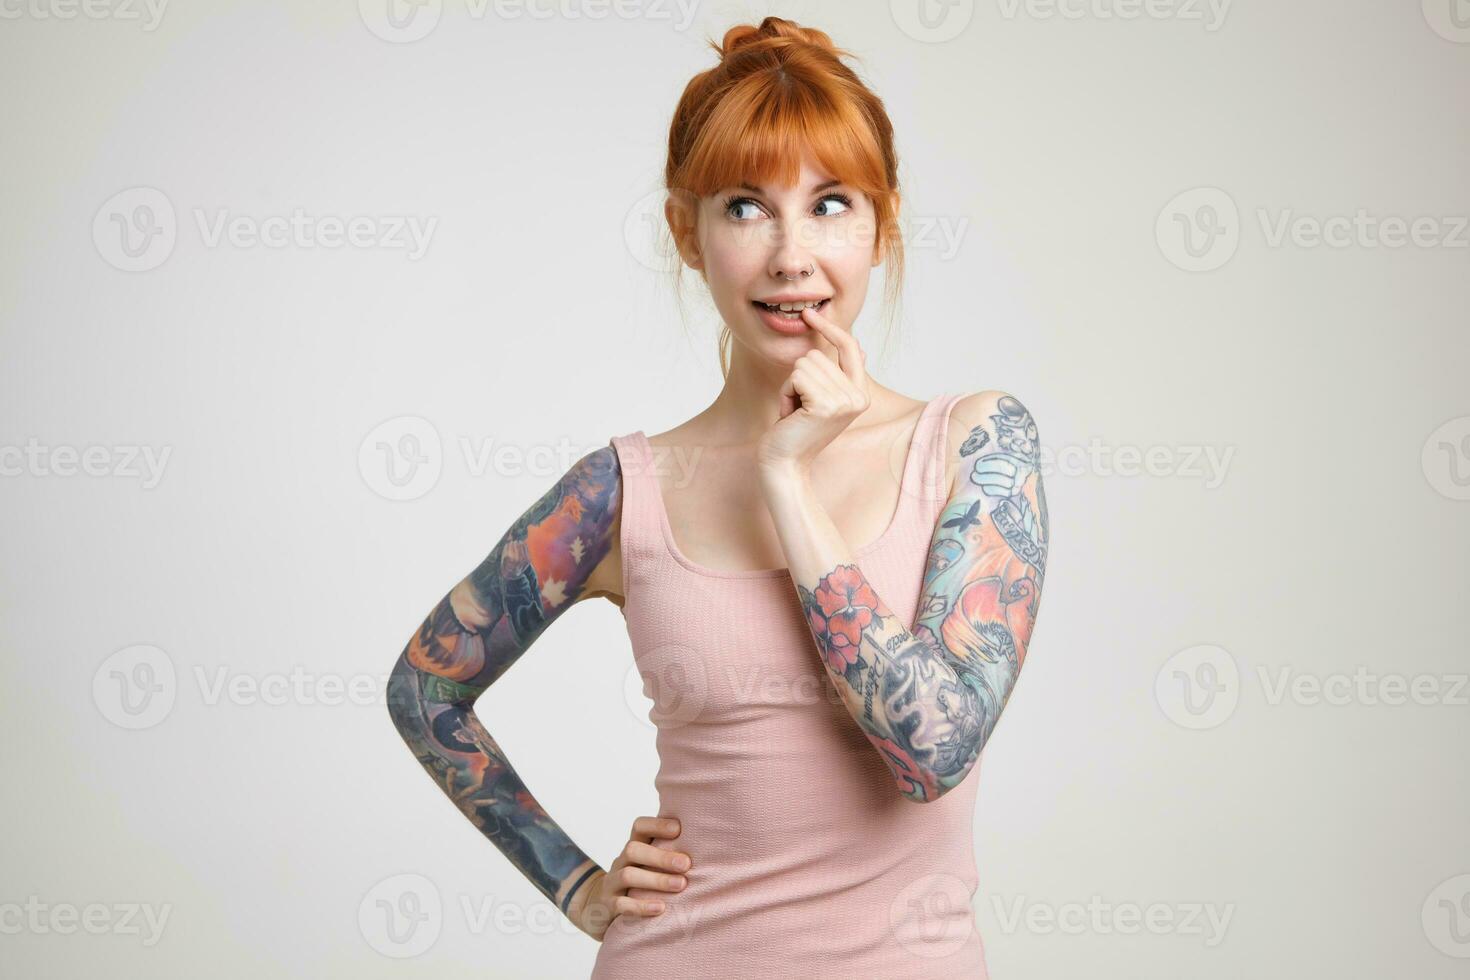 Pensive young pretty redhead woman with tattoos keeping forefinger on her underlip while looking wonderingly aside, standing over white background photo